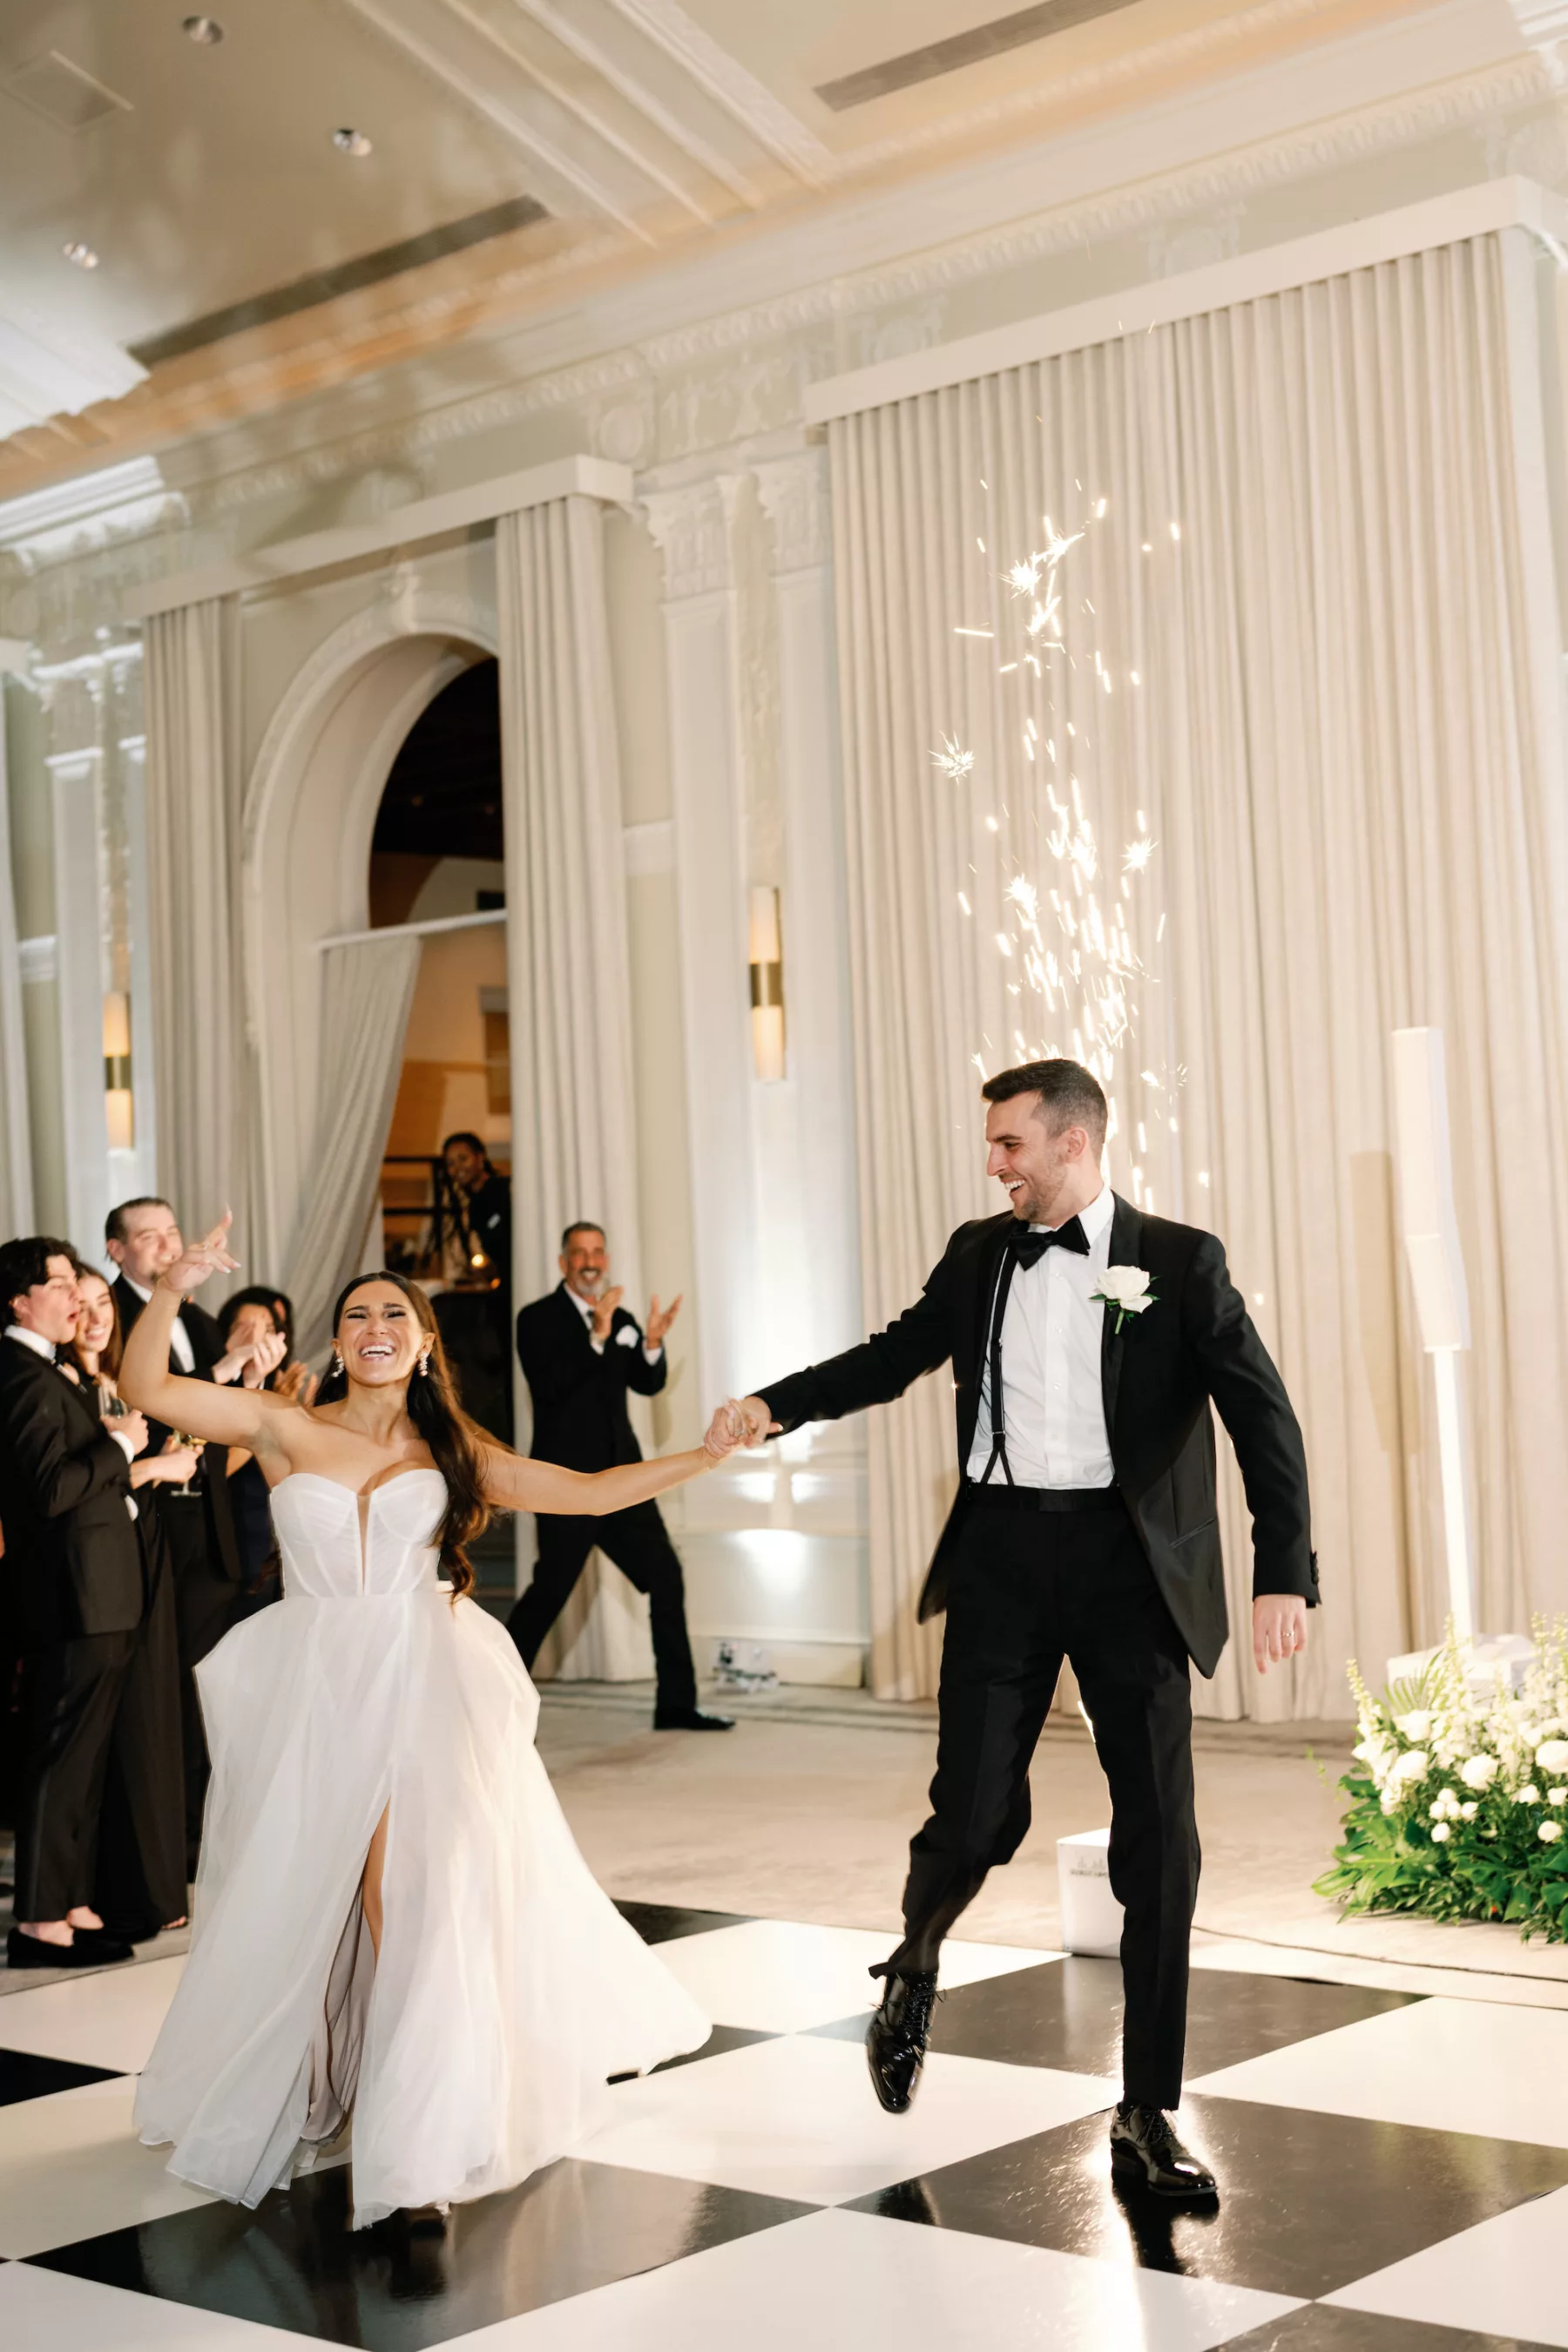 Bride and Groom Wedding Reception Ballroom Grand Entrance with Cold Spark Machines | Black and White Checkered Dance Floor Ideas | Tampa Bay Content Creator Behind The Vows | St Pete Event Planner Coastal Coordinating | DJ Graingertainment | Photographer Dewitt for Love Photography